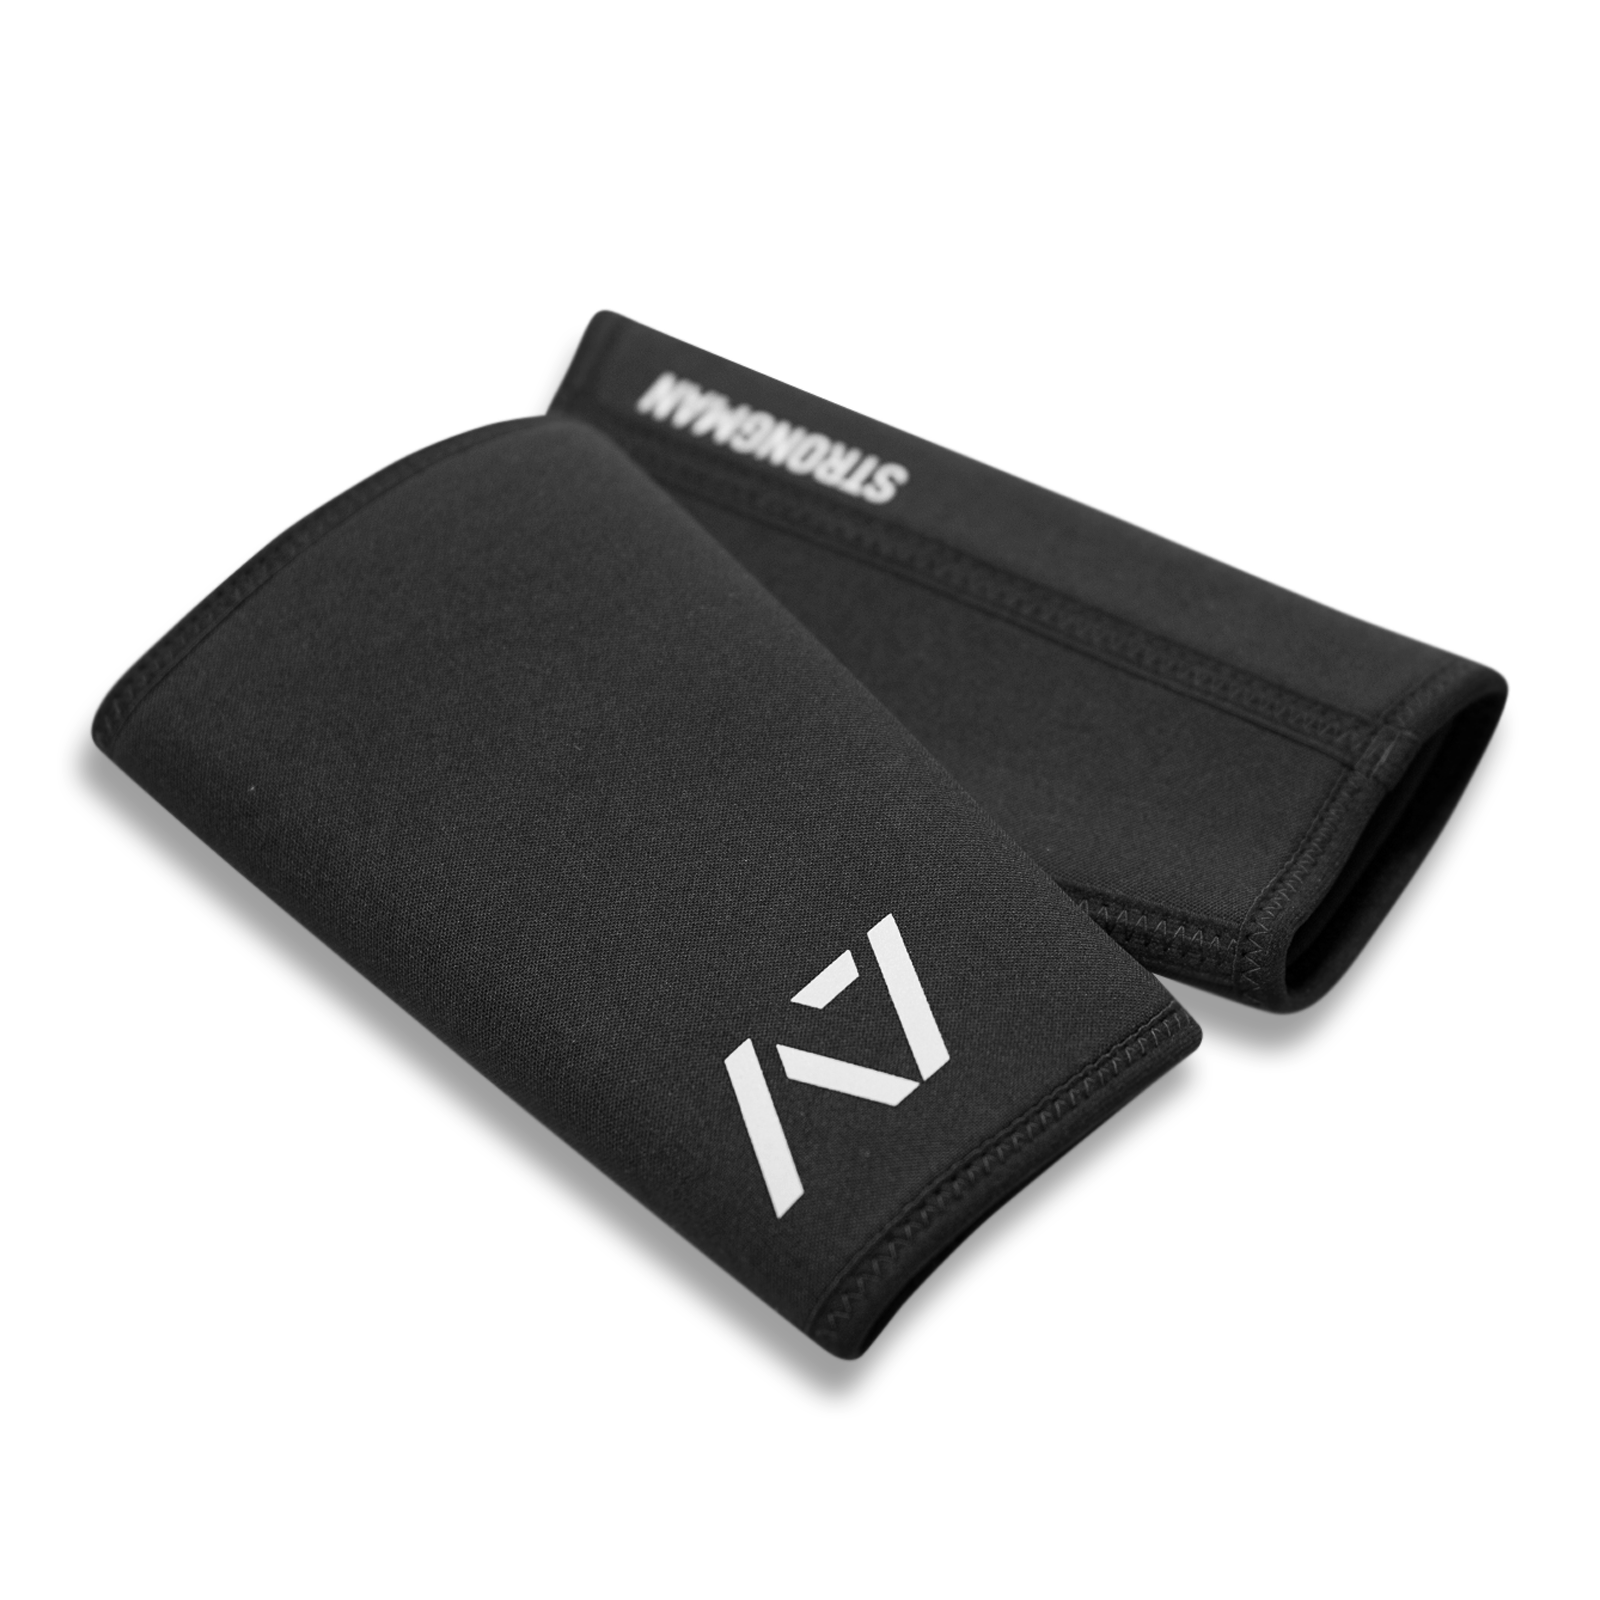 Our 9mm Strongman Knee Sleeves are specifically designed for the athletes who love Strongman training. These are great for extra warm and compression on Atlas Stones, Yoke Carries, Truck Pull, Car Deadlift